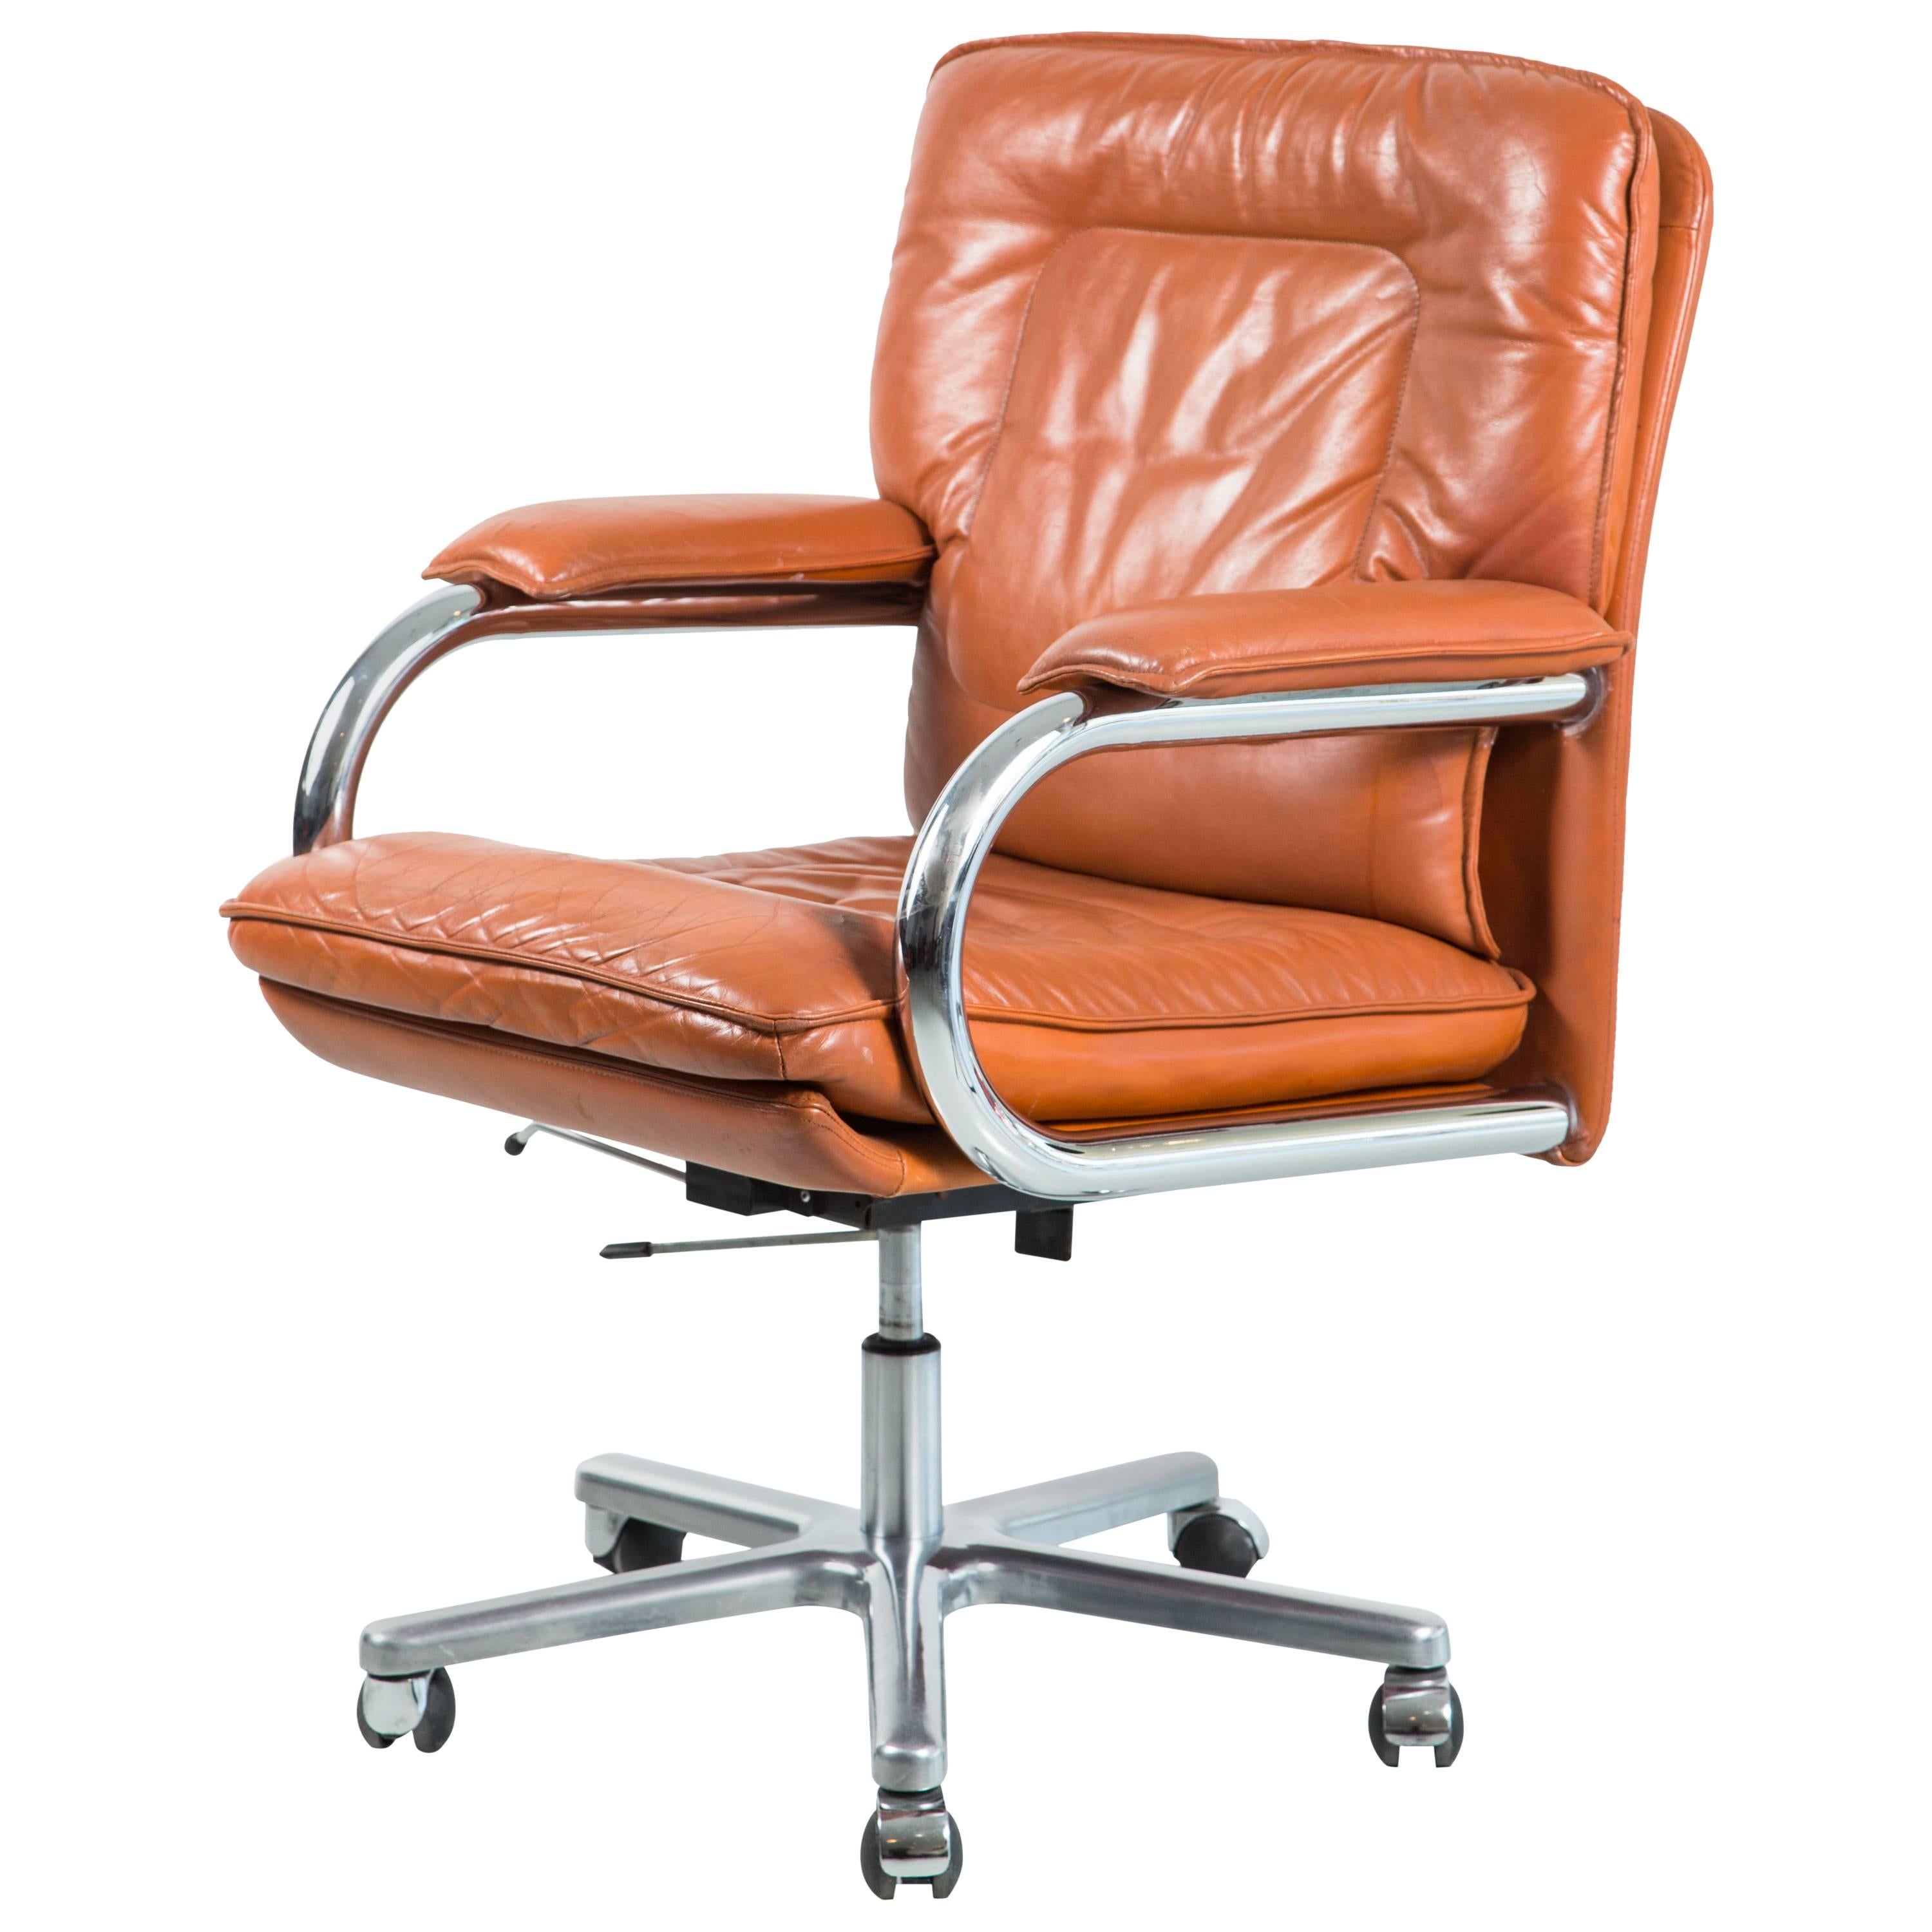 Italian Pace Collection Desk Chair by Mariani